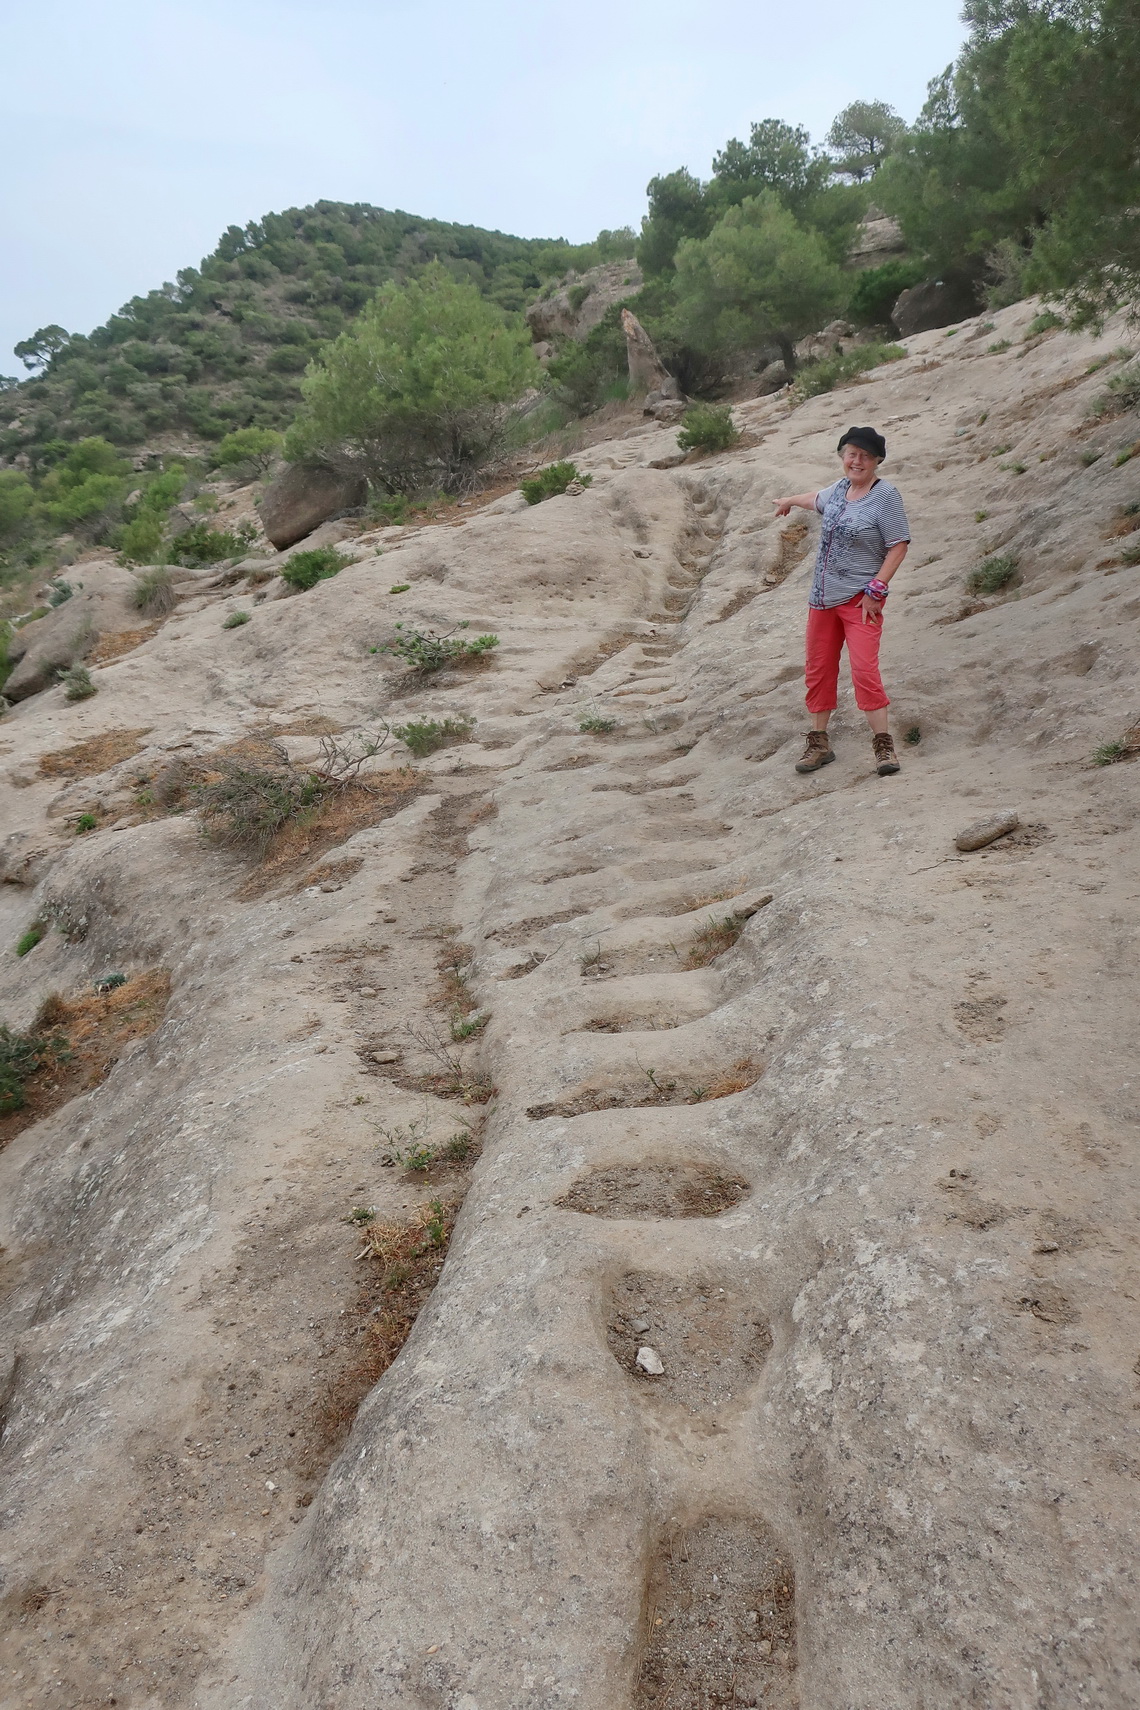 The last southern part of our hike down from Pico del Convento with ancient horse footprints in the rocks because they couldn't go through the gorge